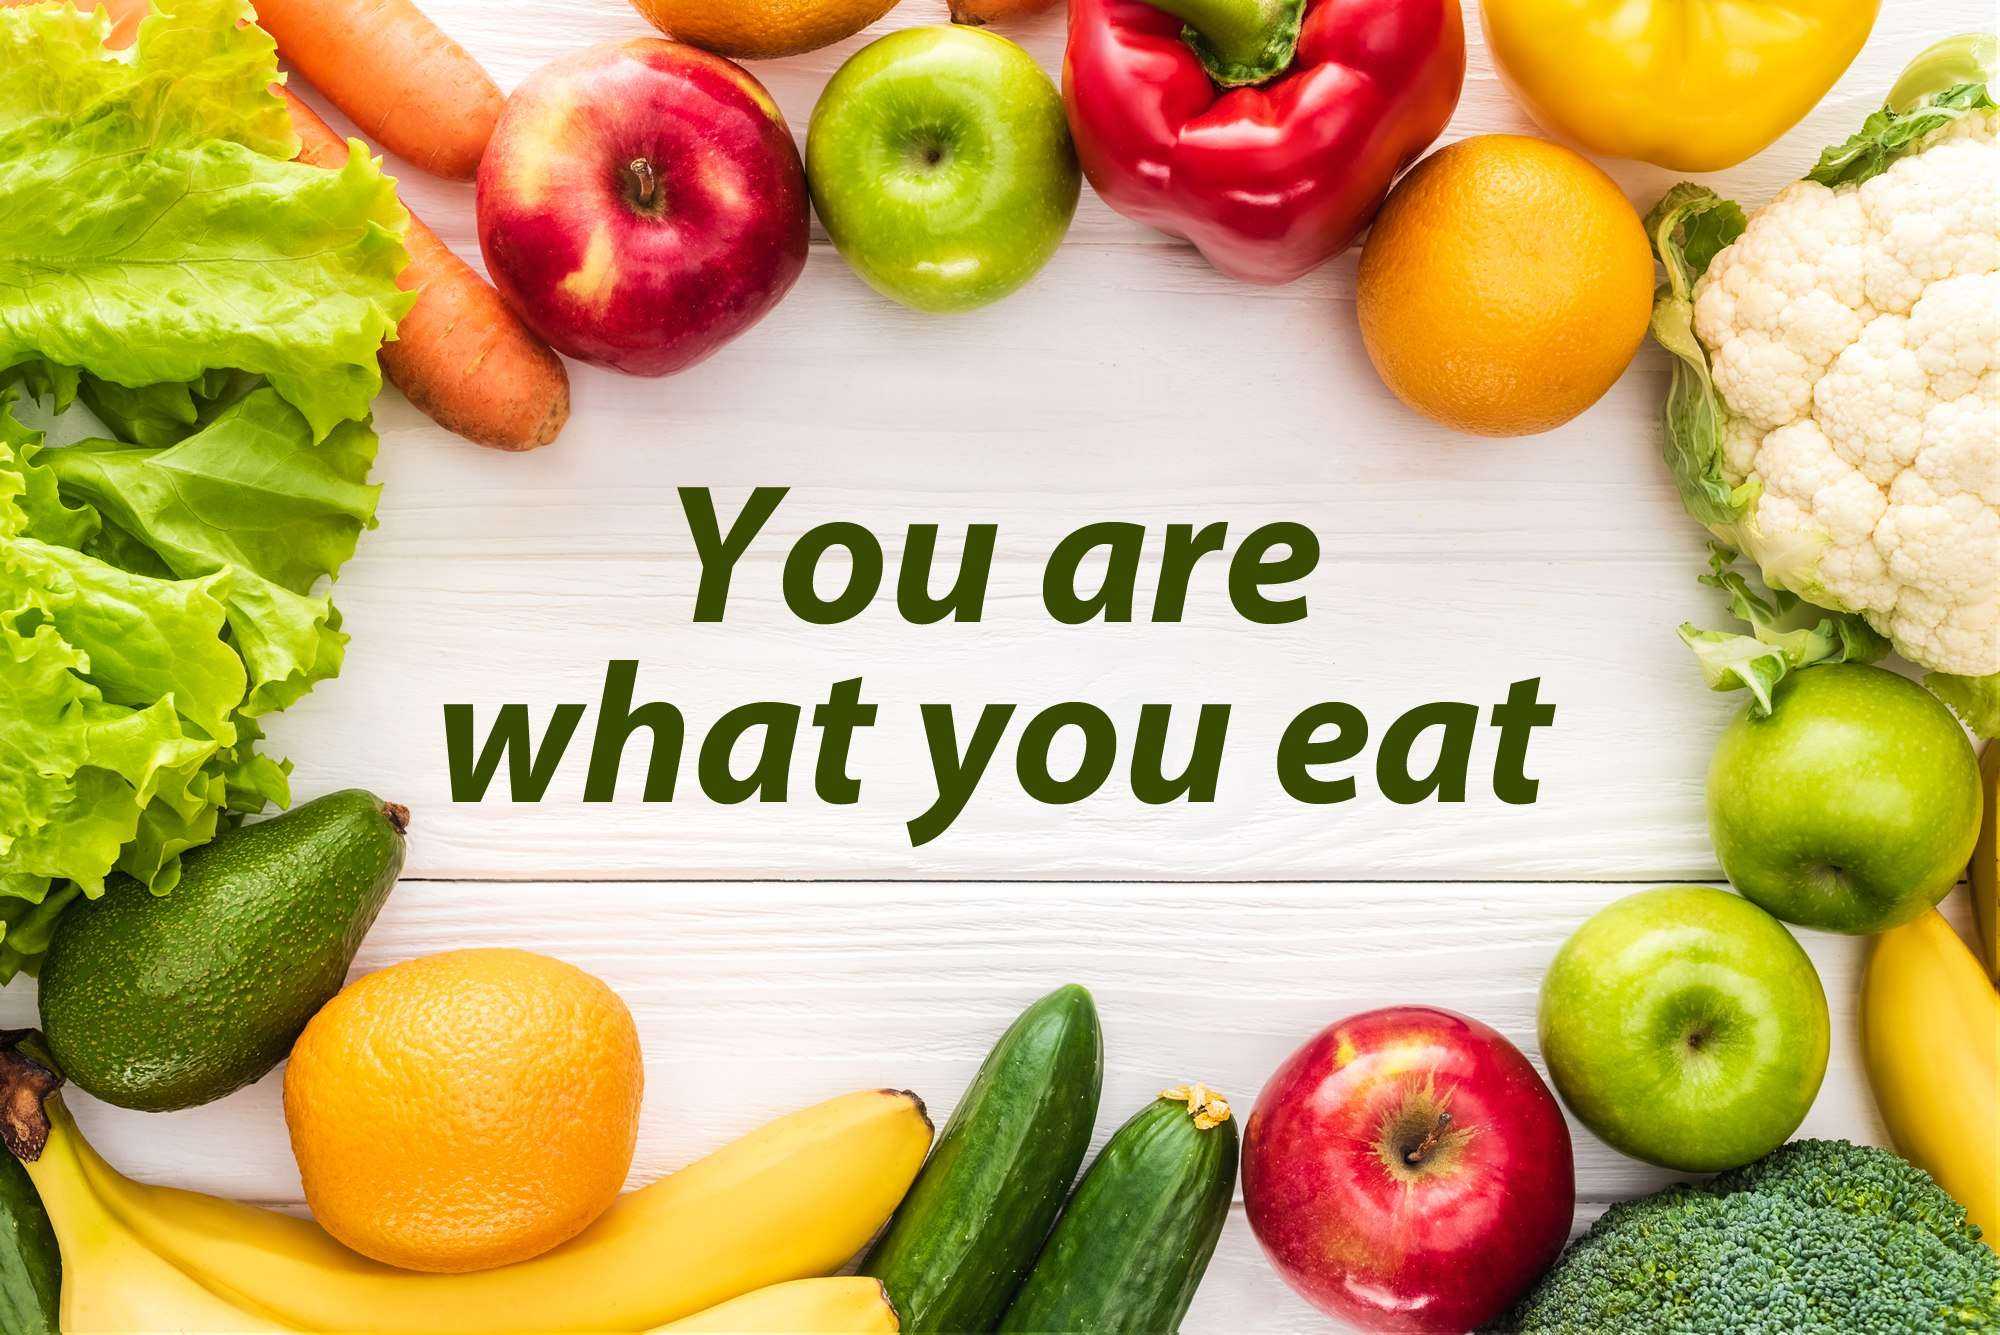 Food for your mental health â€“ You are what you eat | Toronto Caribbean ...